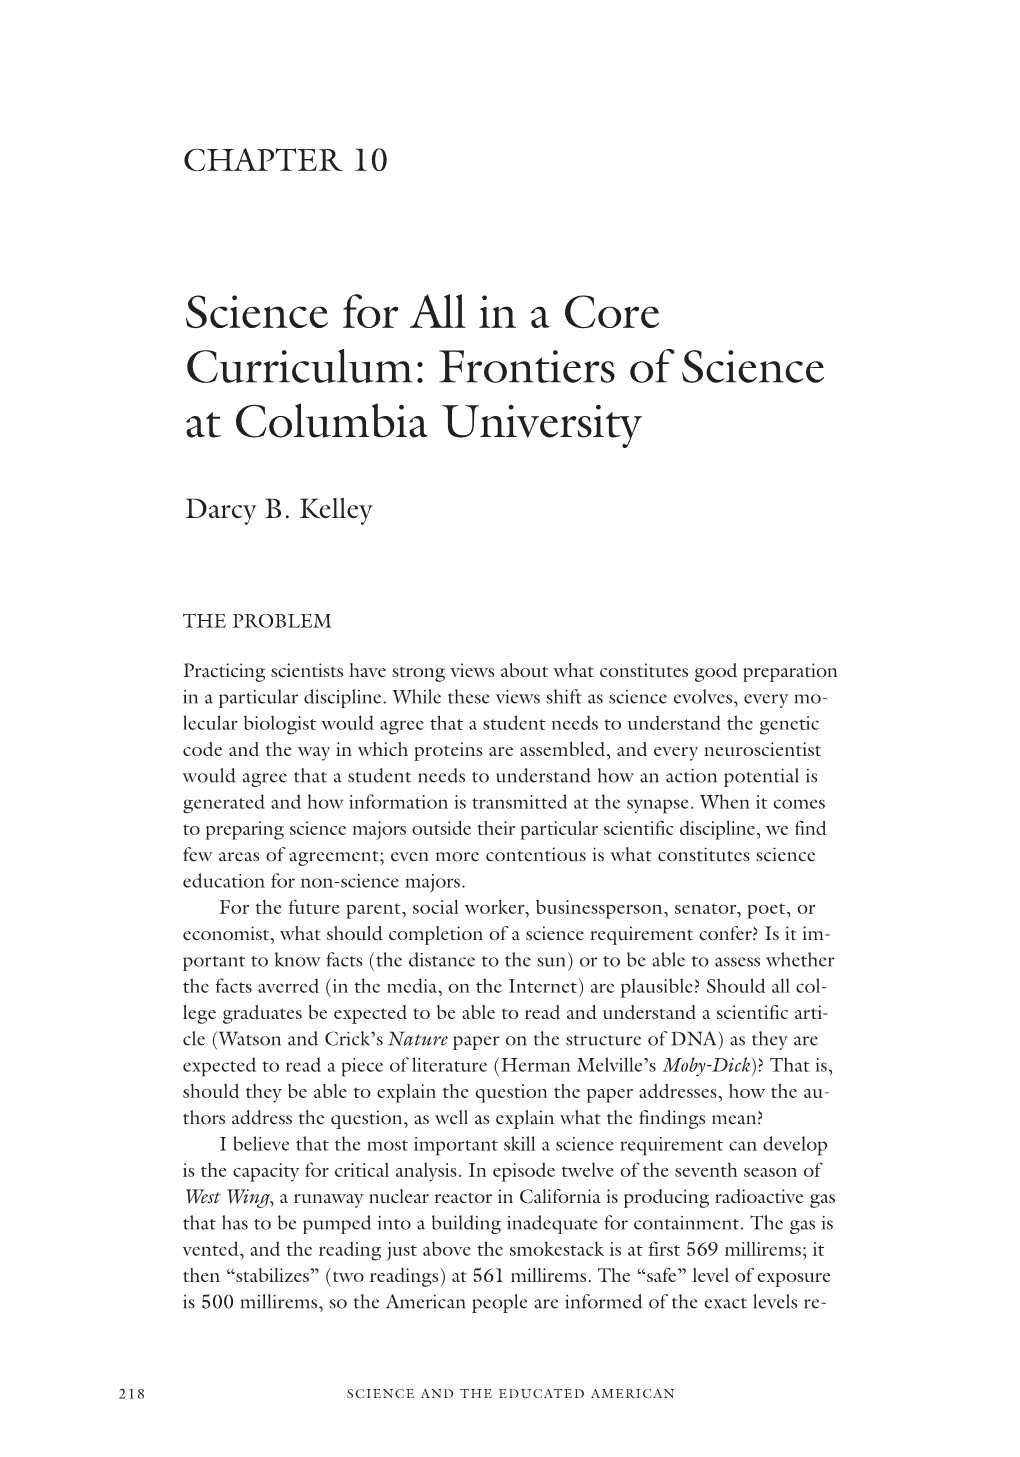 Frontiers of Science at Columbia University